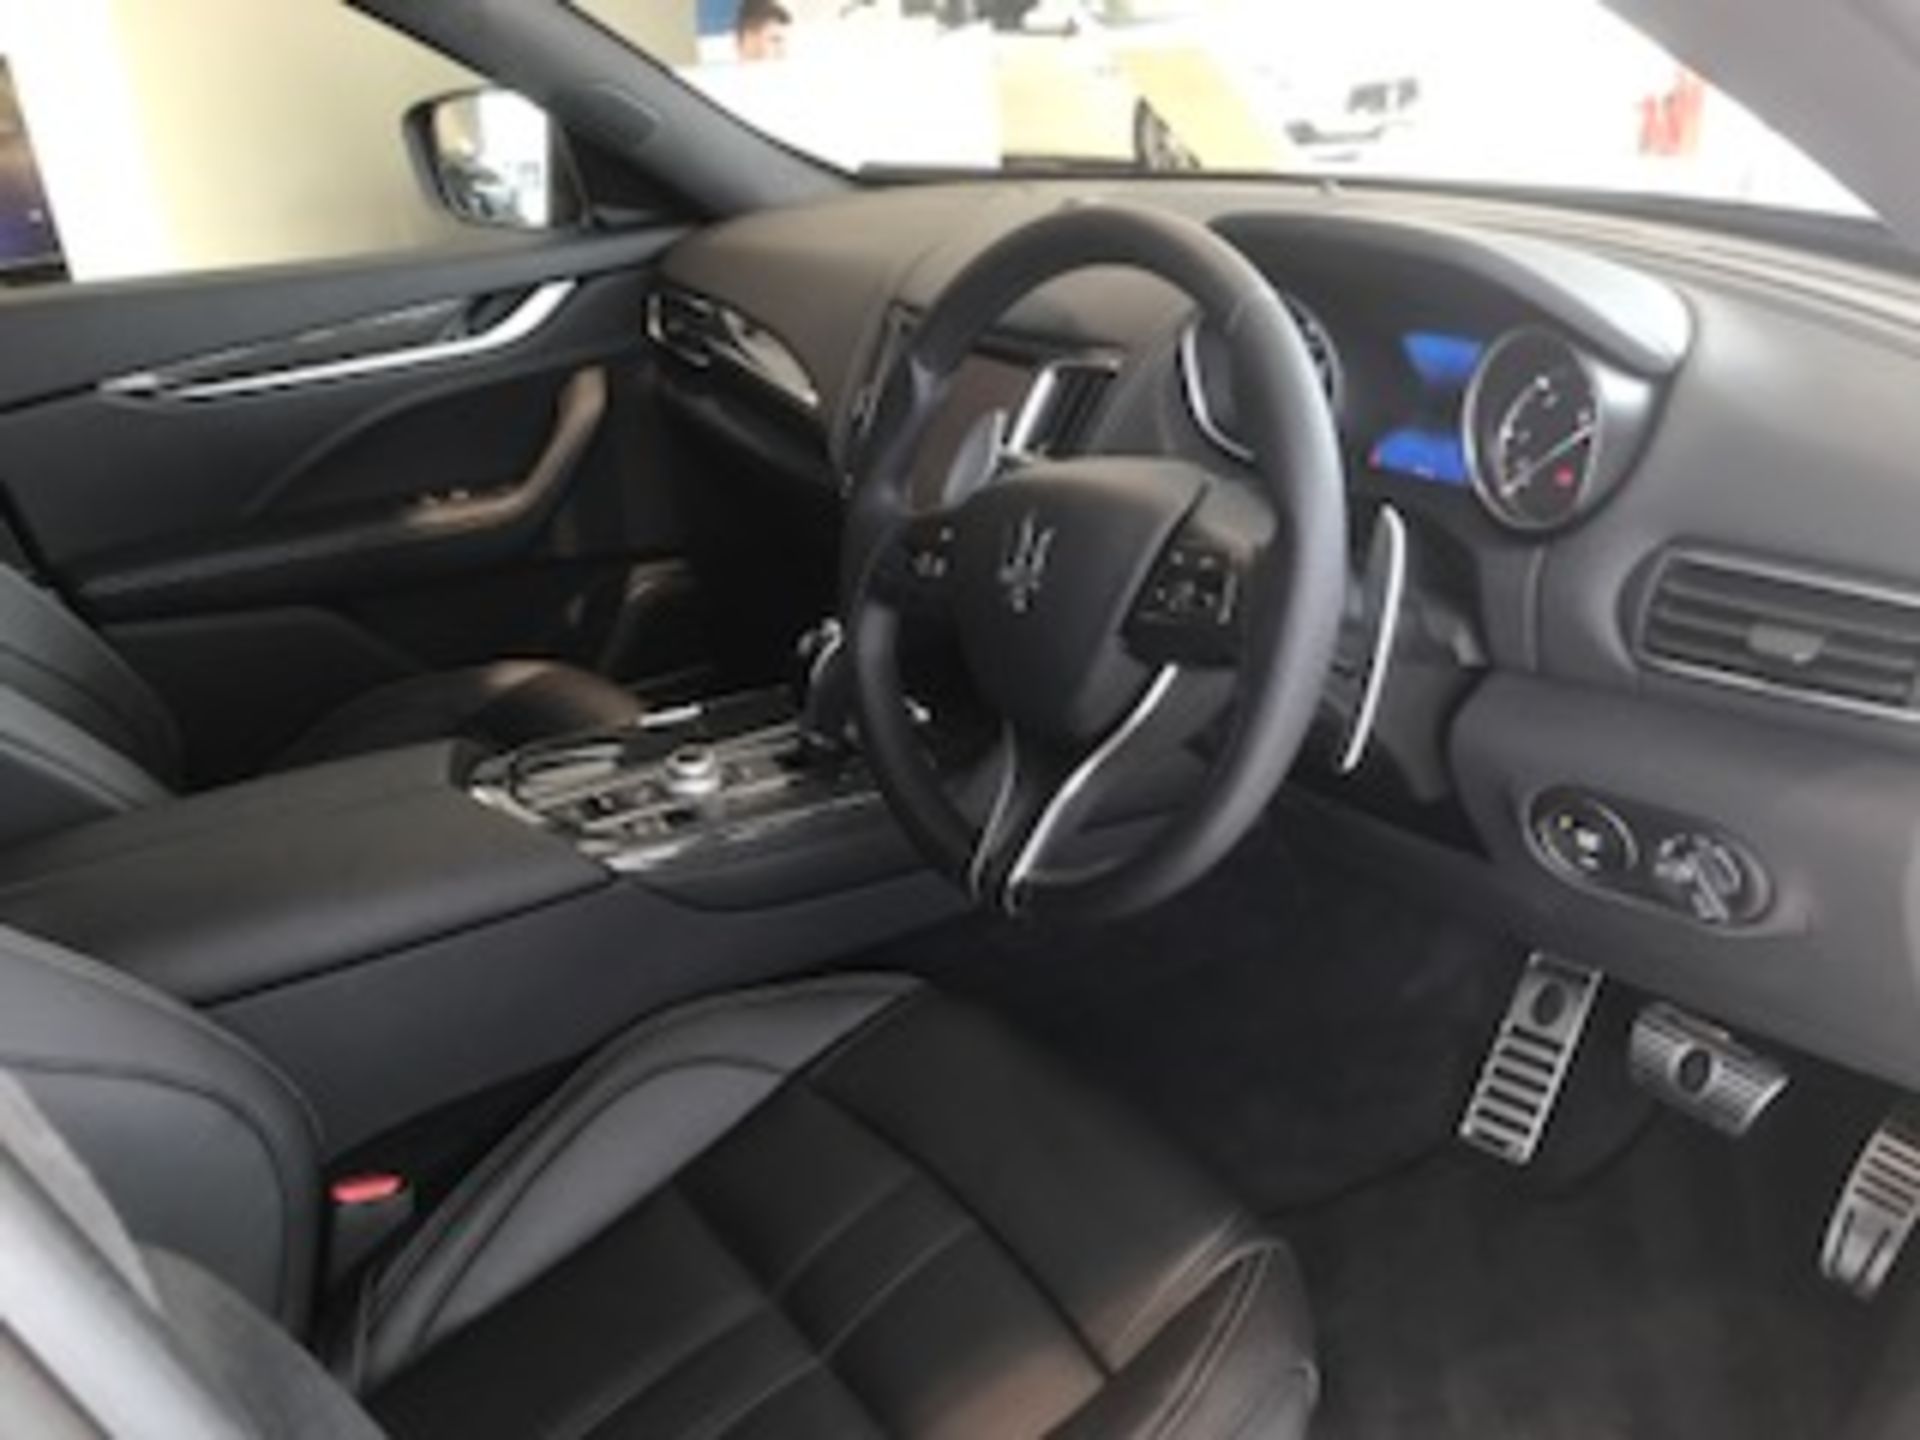 2017 Maserati Lavante 3L Turbo. 1 Owner From New. Low Mileage - Image 9 of 14